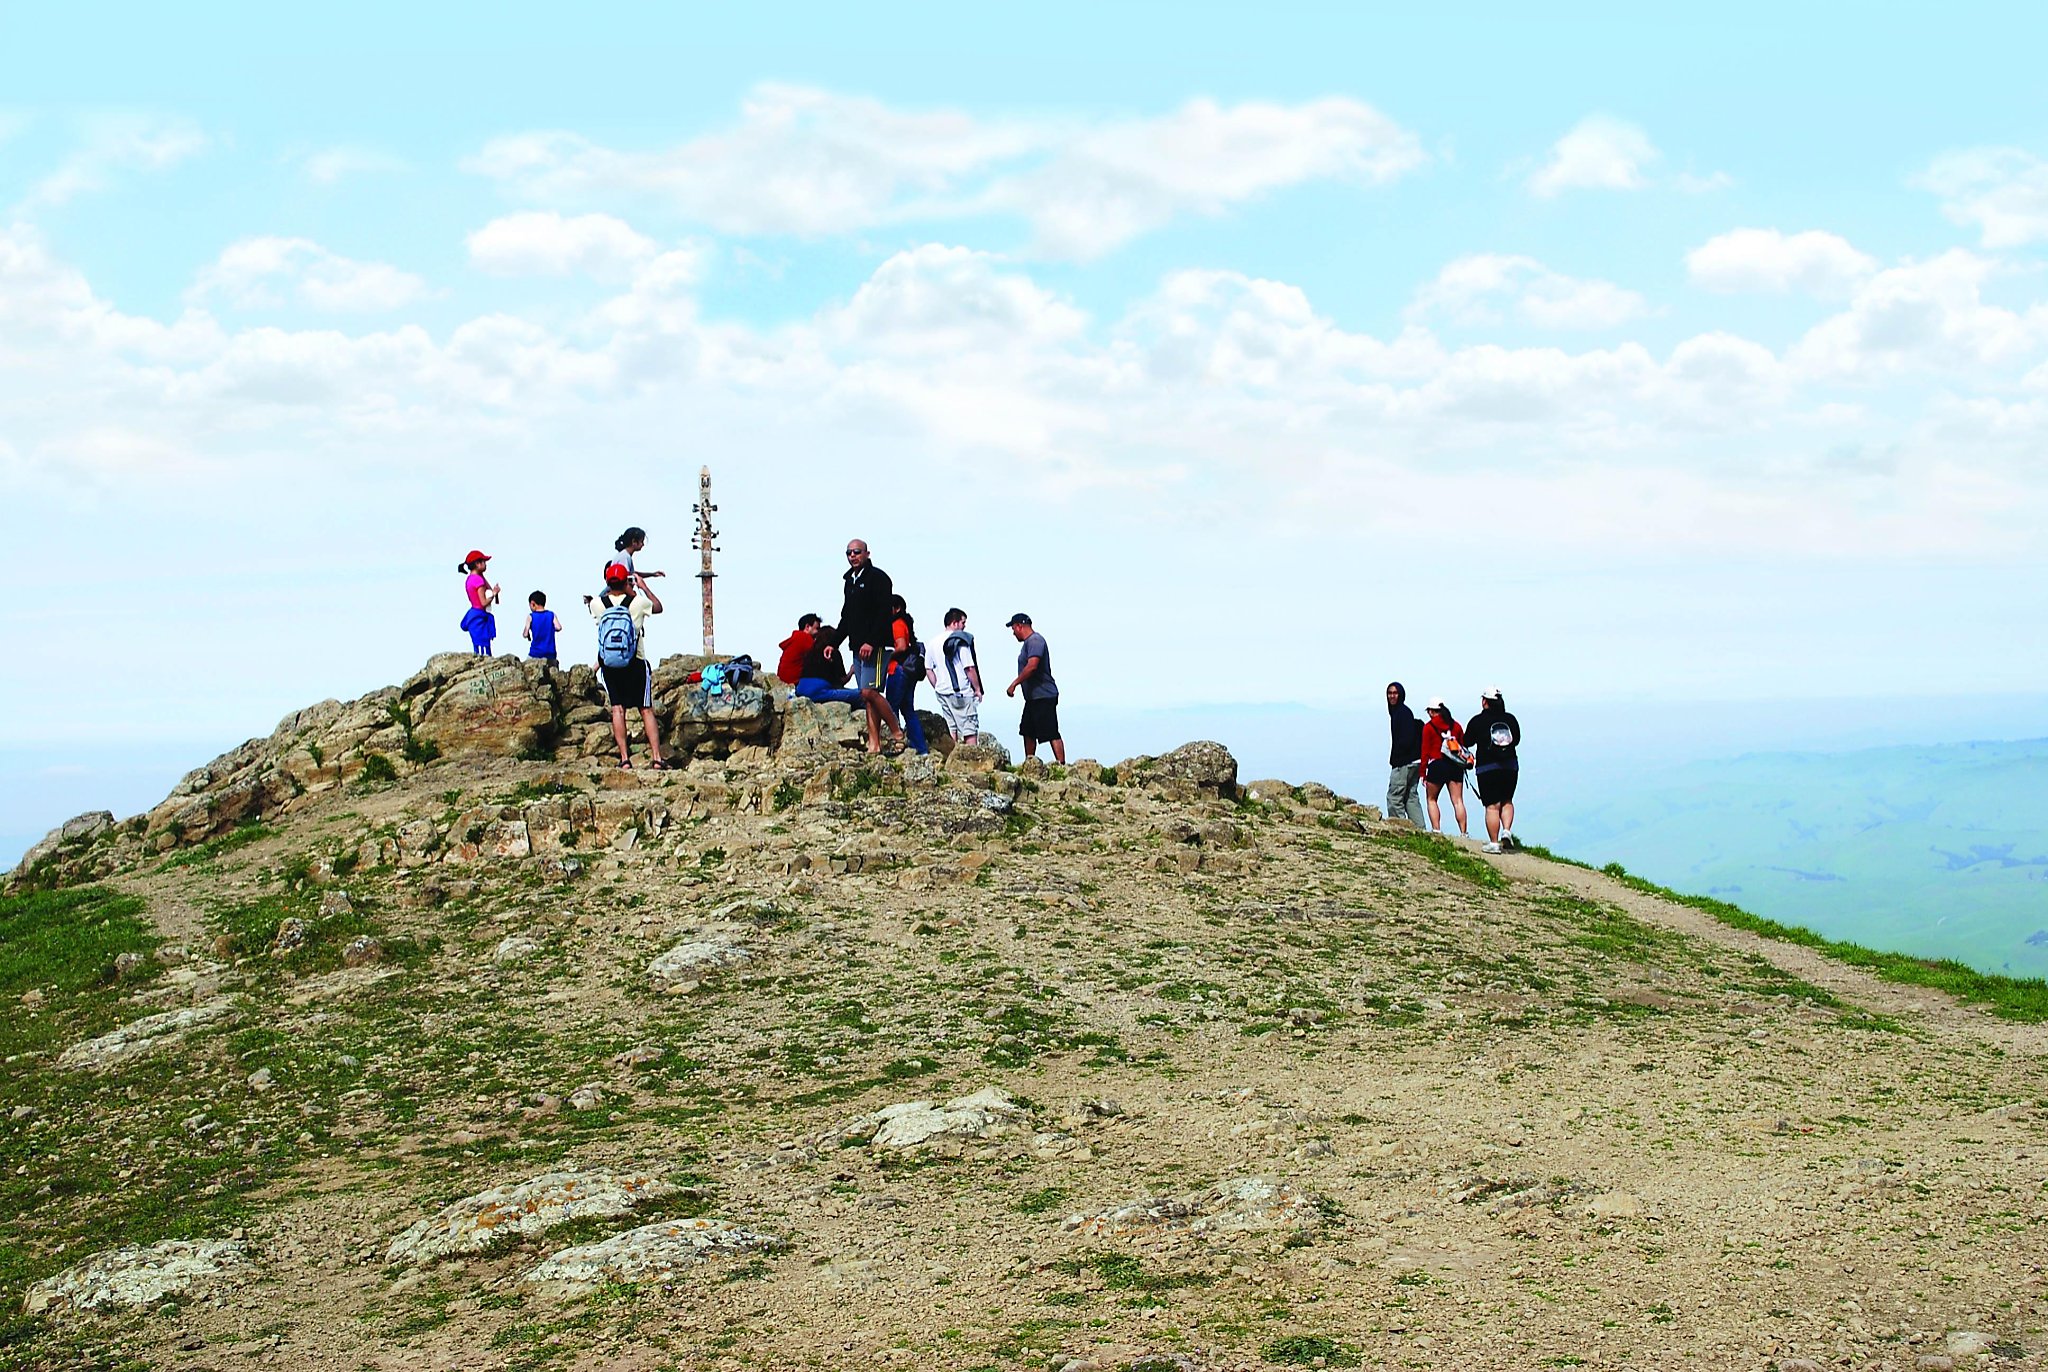 Hiking with 1000 of my closest friends – Mission Peak – September